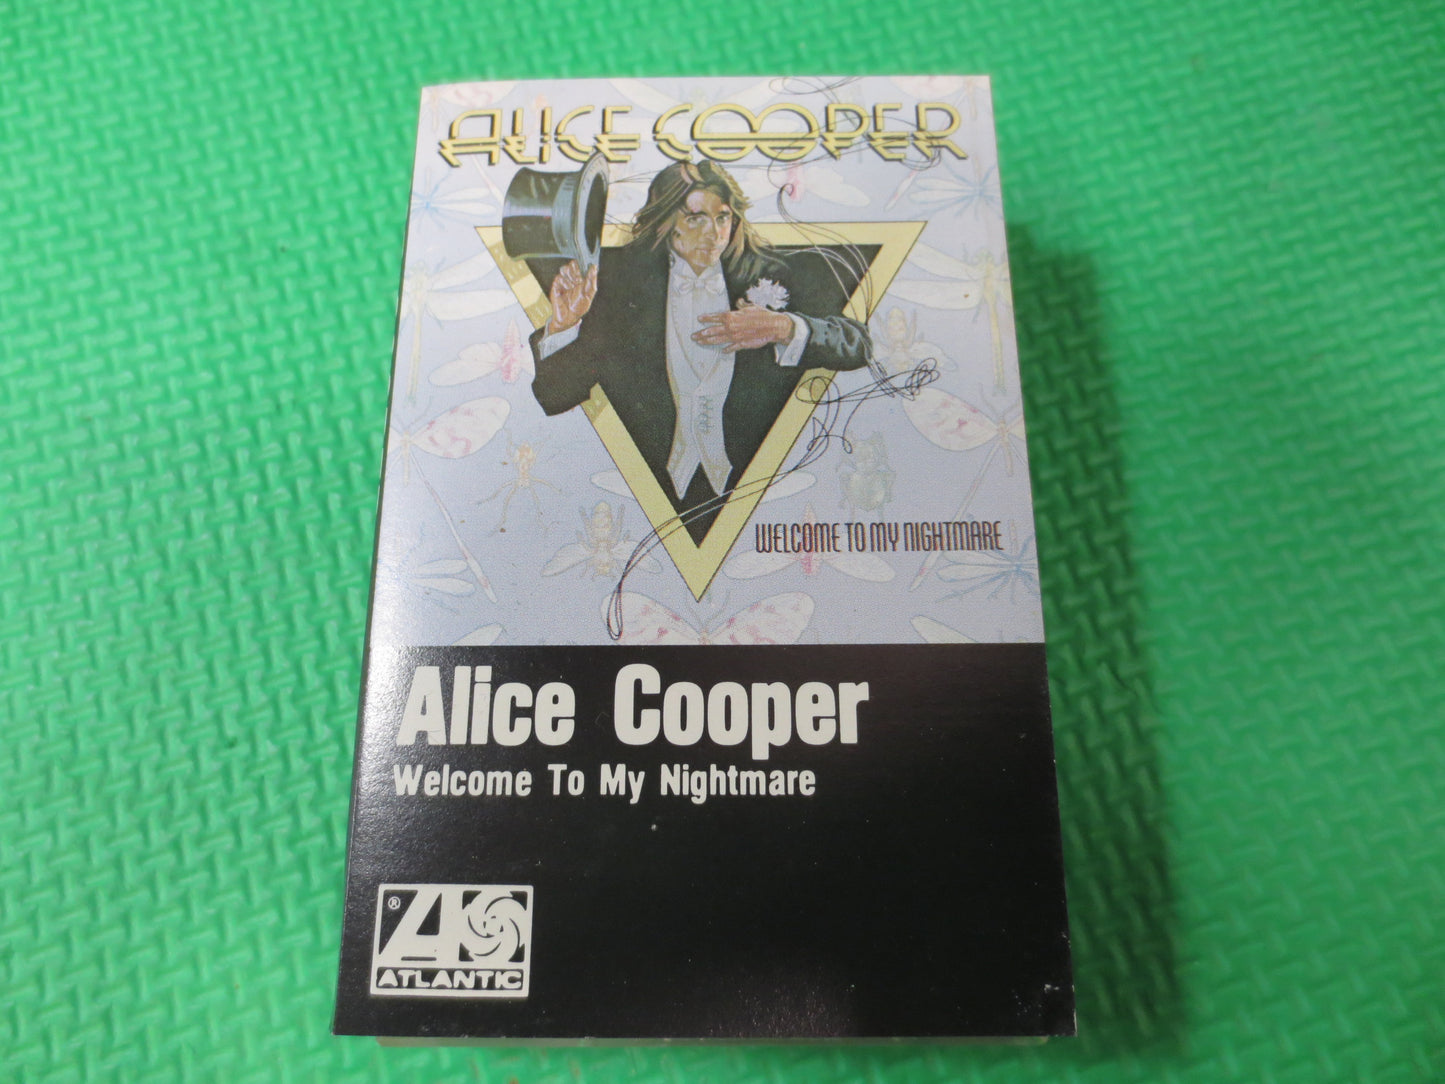 ALICE COOPER Tape, Welcome To My NIGHTMARE, Alice Cooper Album, Alice Cooper Music, Tape Cassette, Cassette, 1975 Cassette